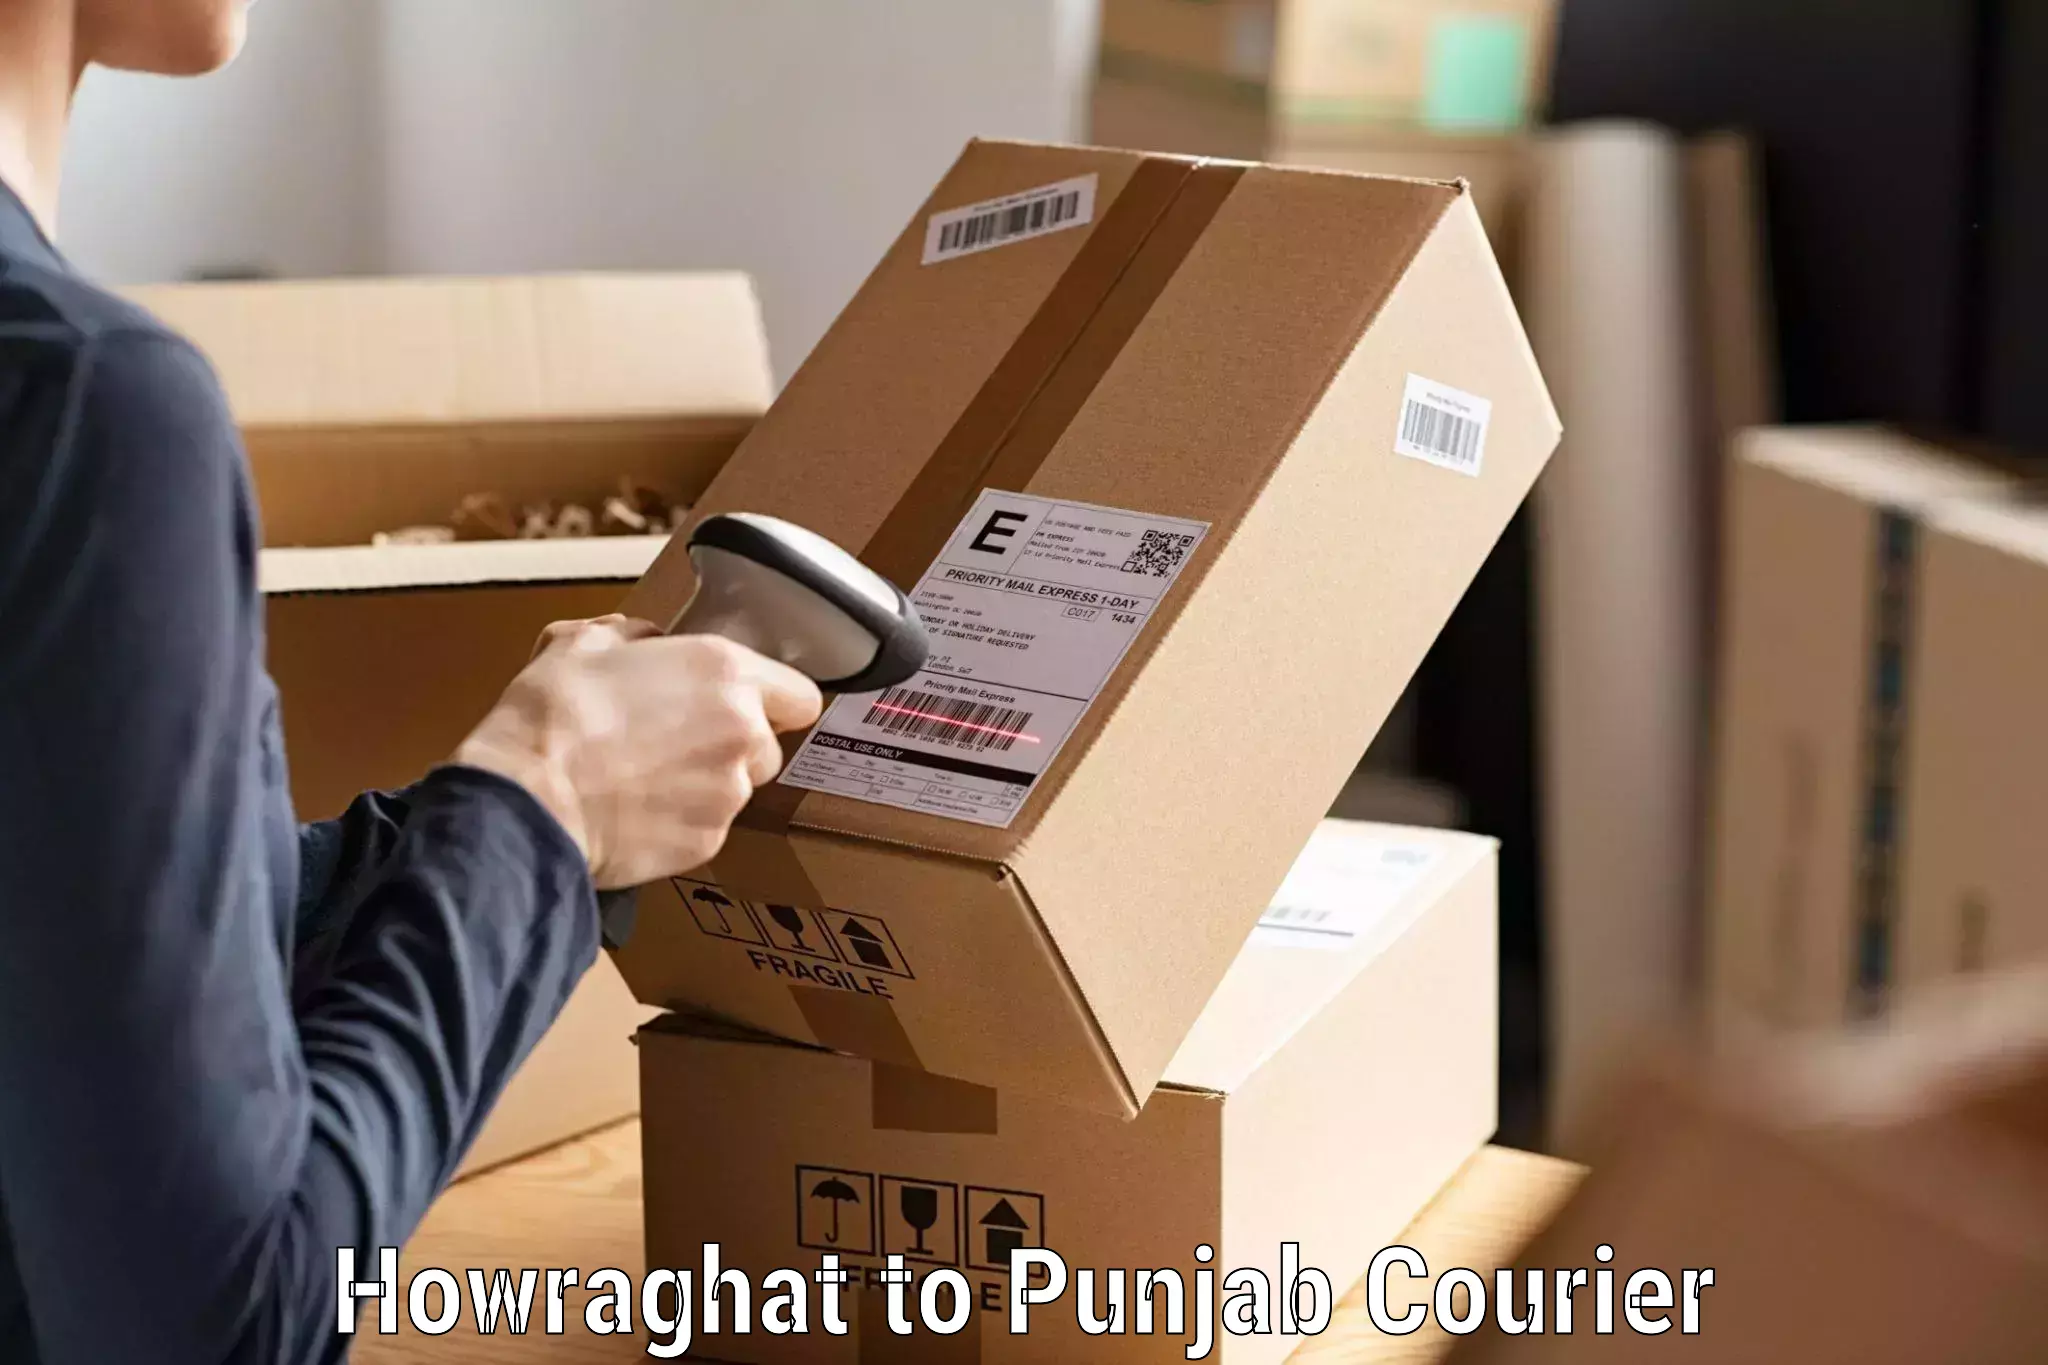 State-of-the-art courier technology Howraghat to Ajnala